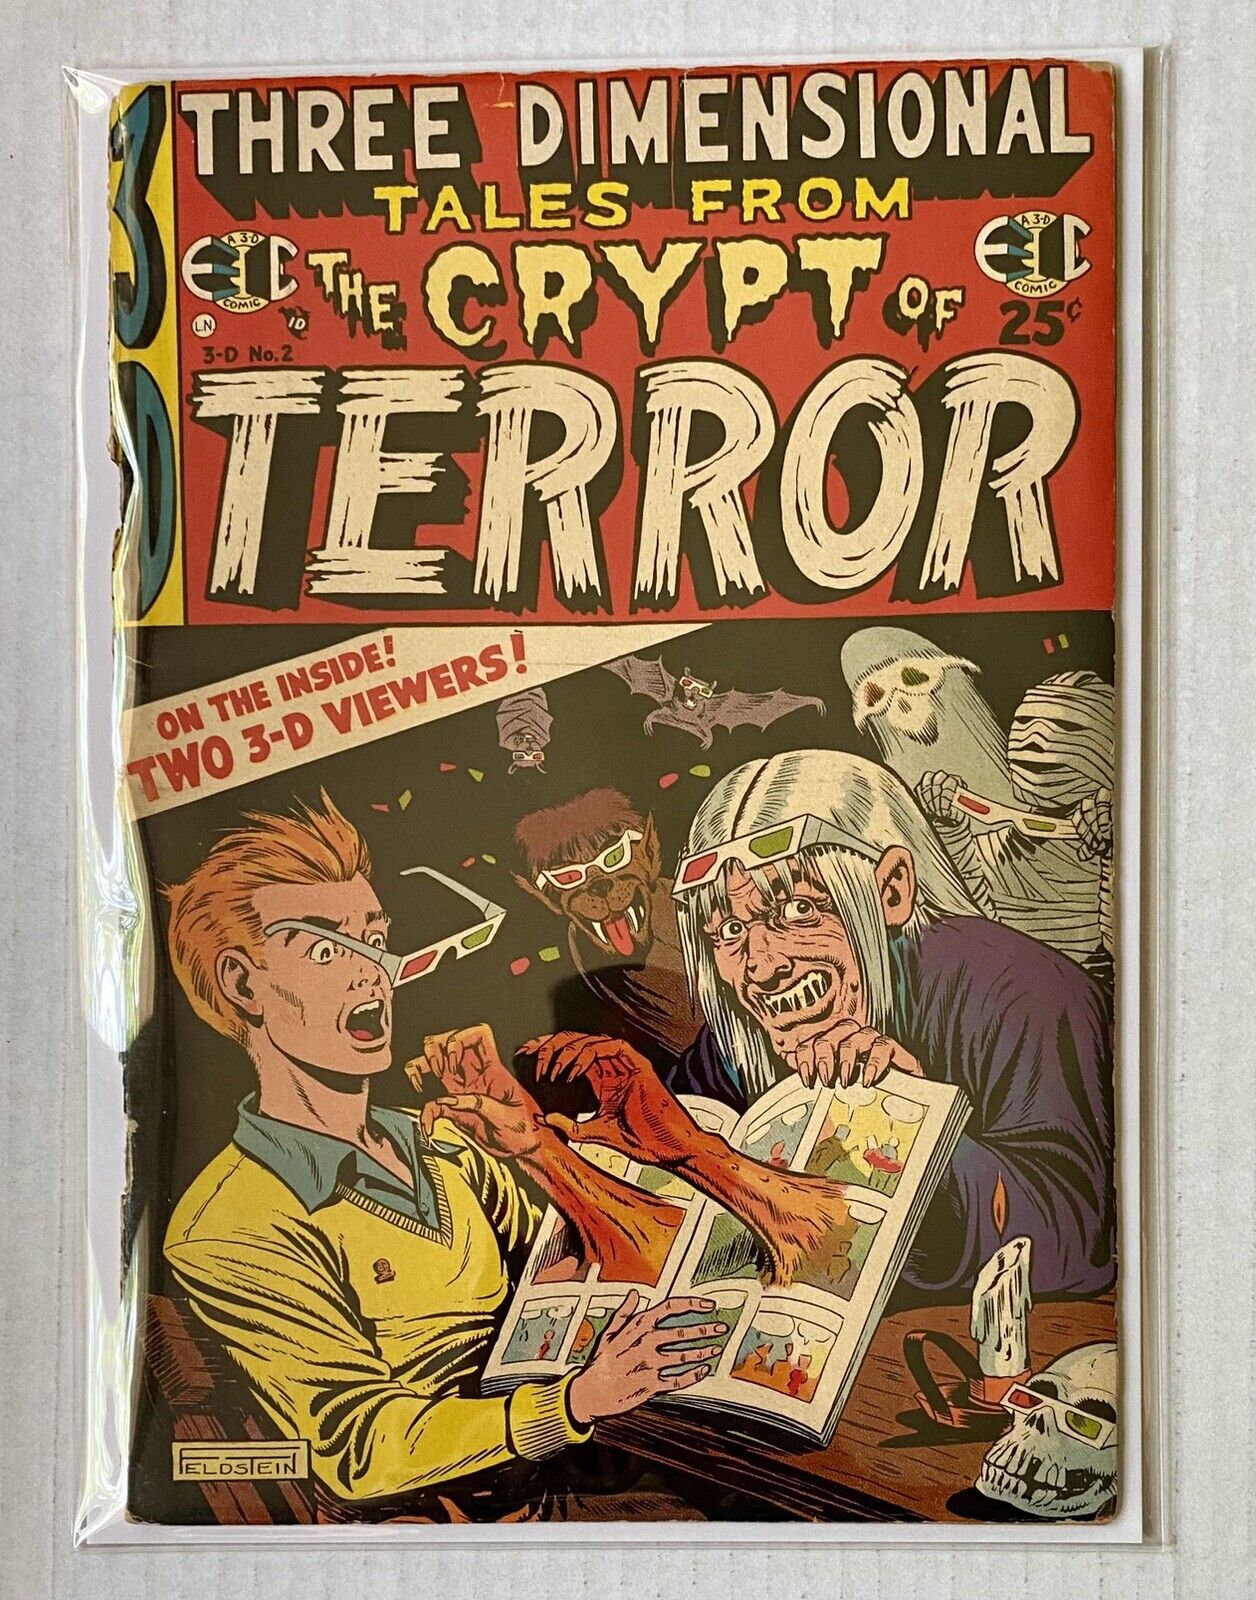 3-D TALES FROM THE CRYPT OF TERROR # 2 3.0 GD/VG 1954 3D GLASSES ATTACHED EC